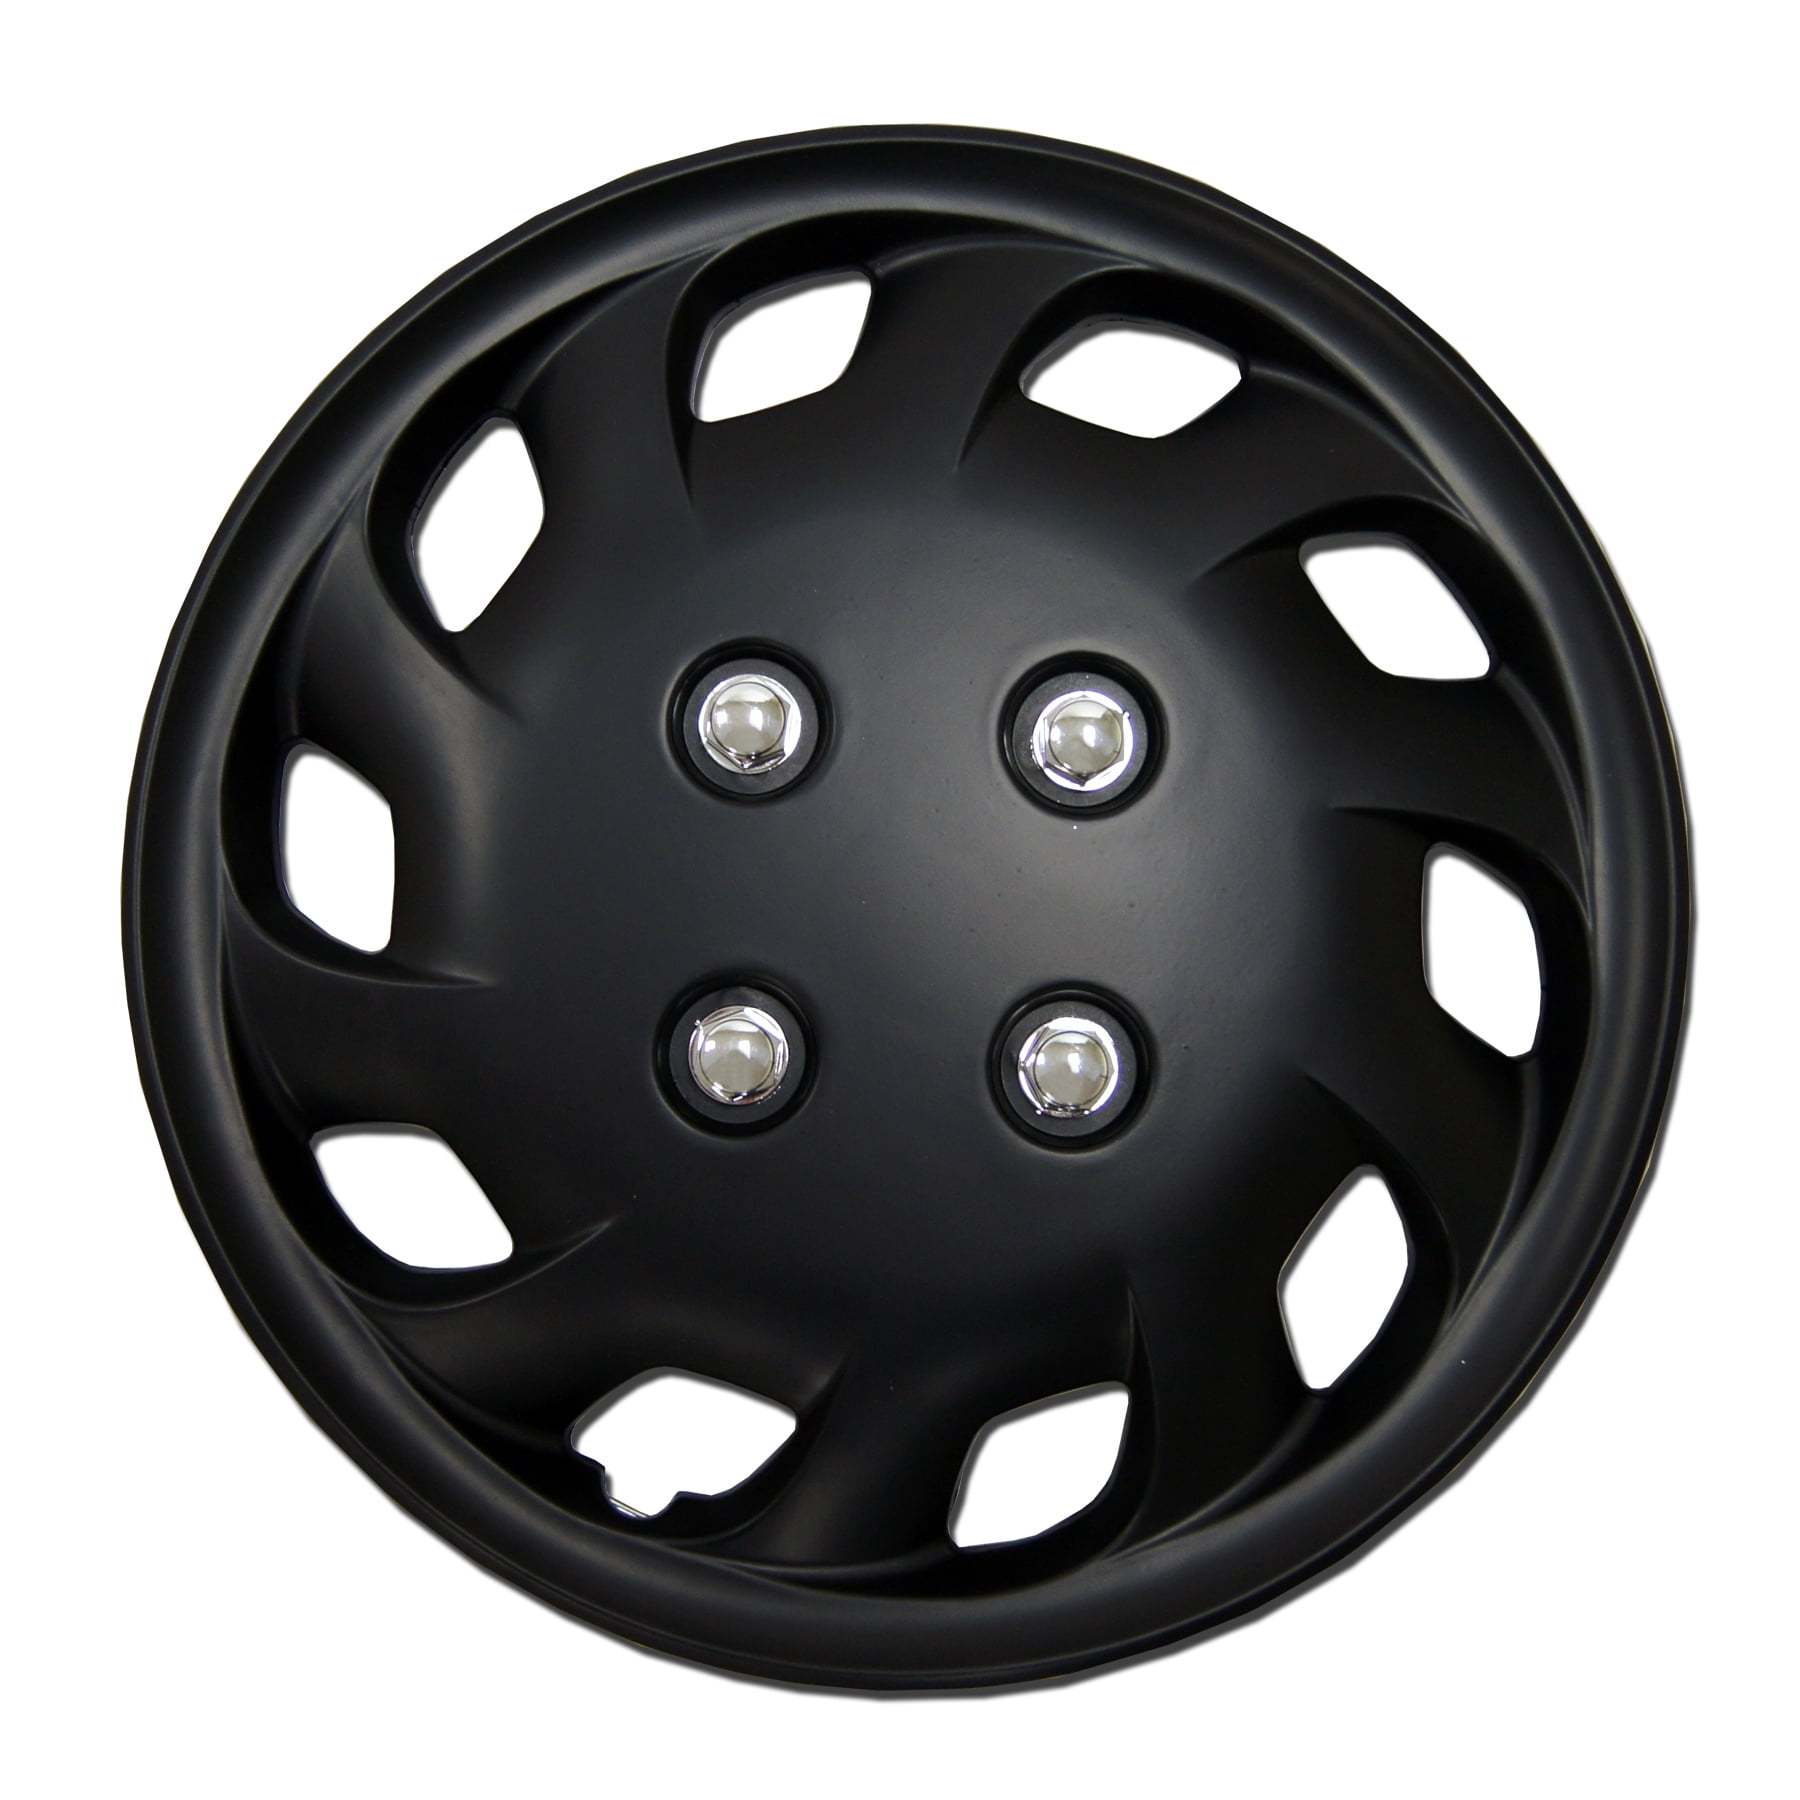 Single Qty 1pc 14 inch Wheel Rim Skin Cover Hubcap Hub caps 14" Inches Style#027 